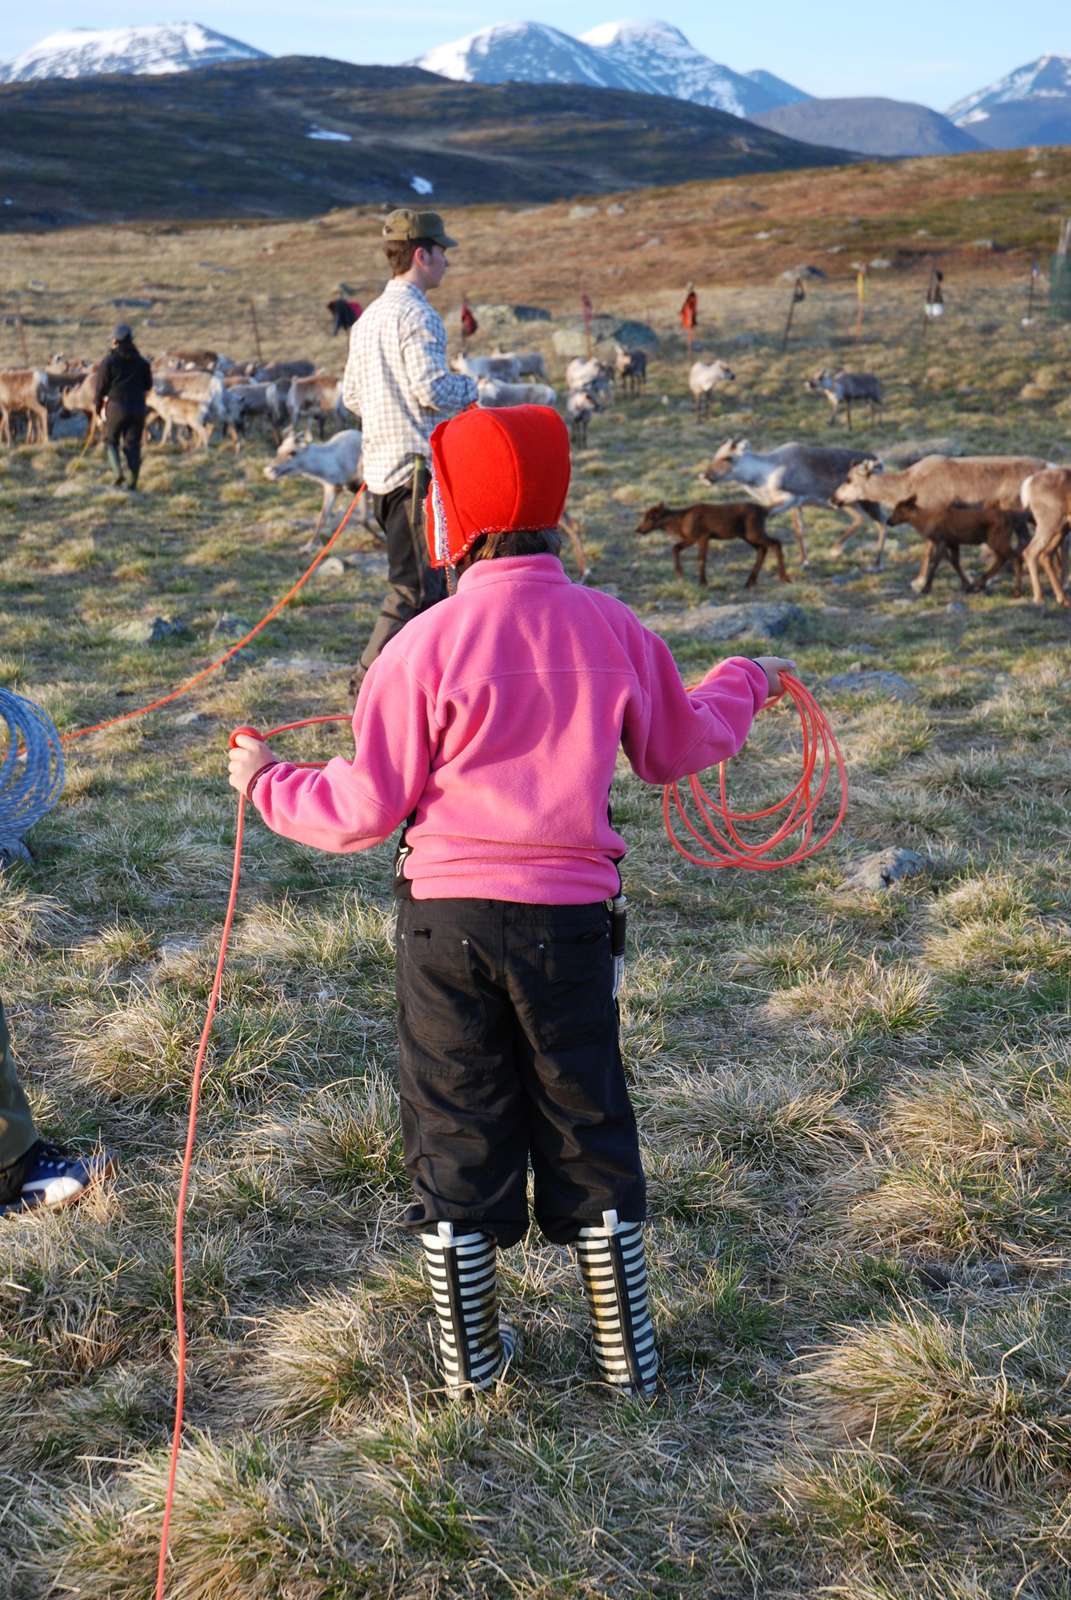 Child in the cow field